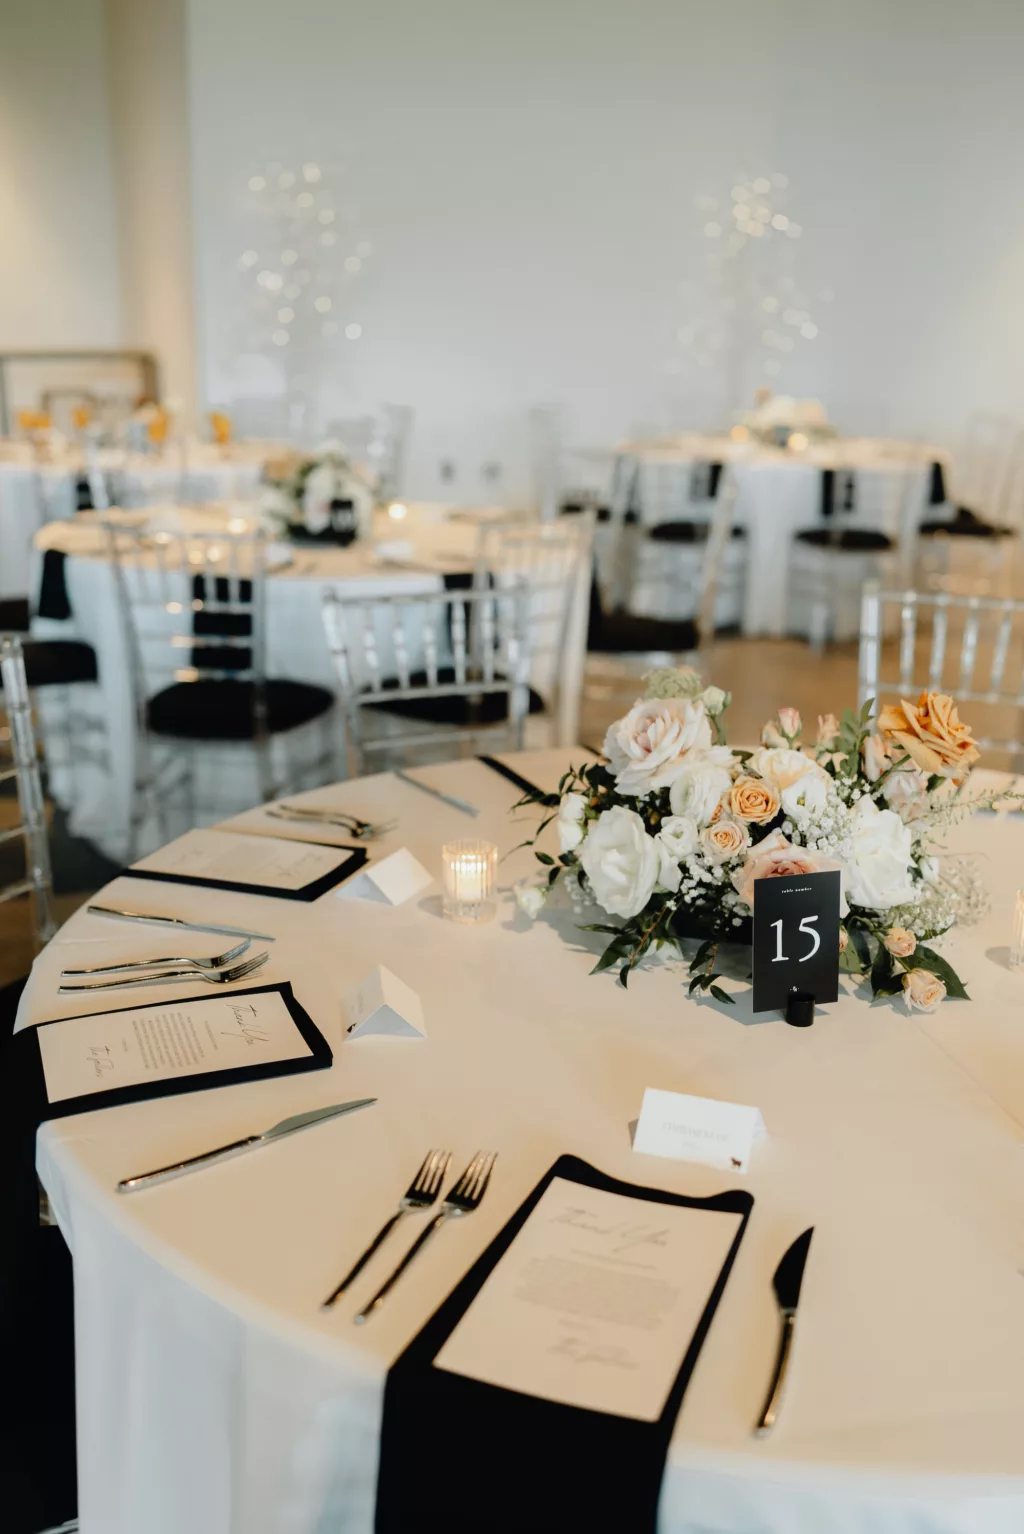 Modern White and Black Wedding Reception Tablescape Decor Inspiration | Tampa Bay Kate Ryan Event Rentals